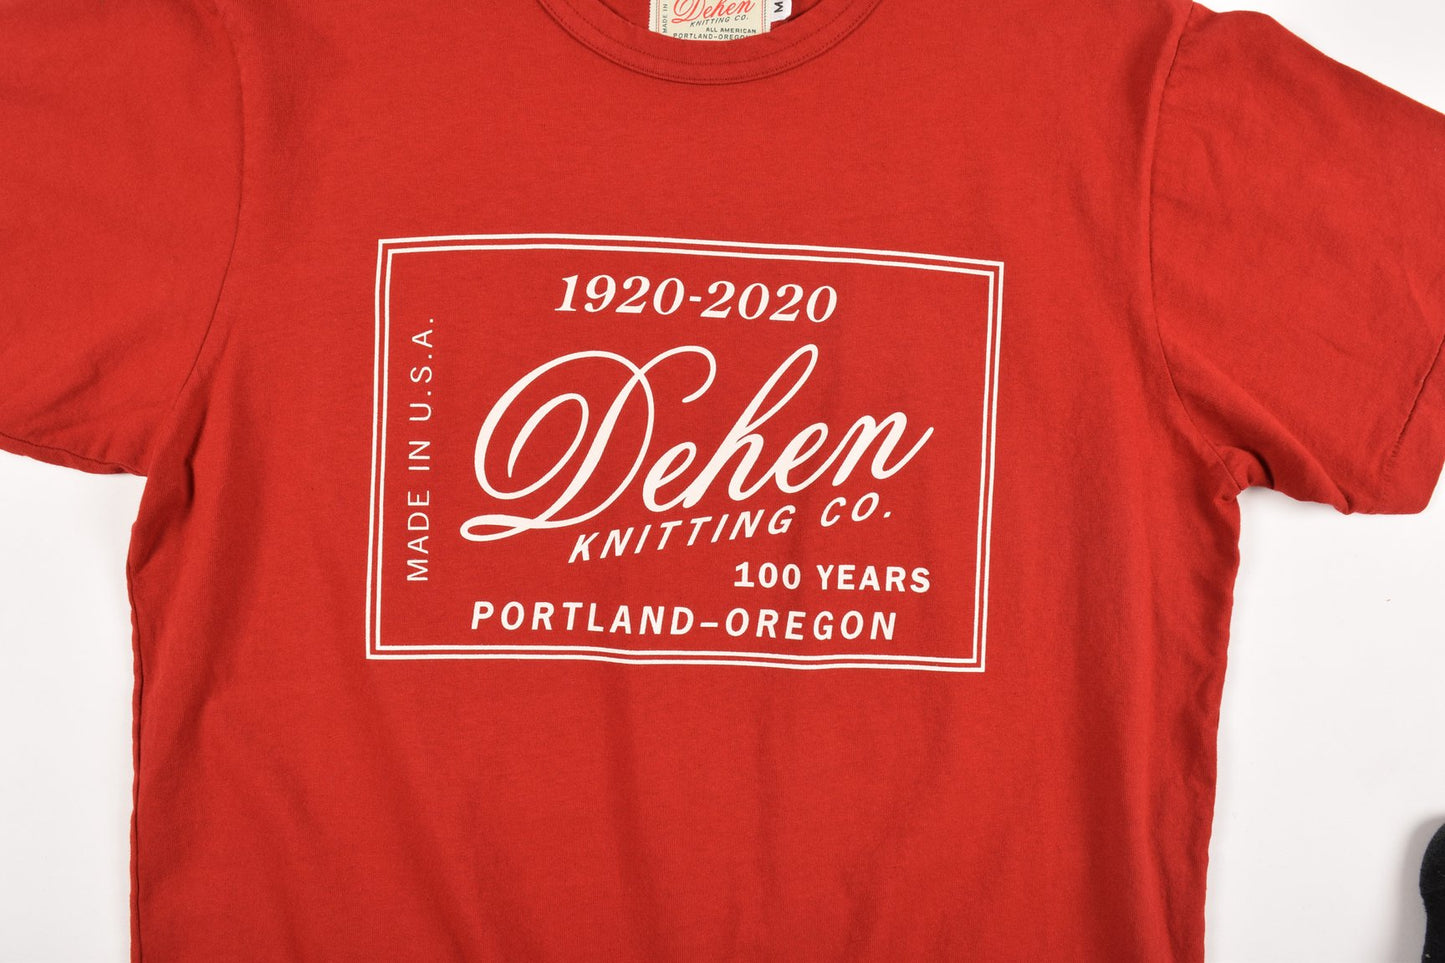 Dehen 100 Year Anniversary Label Tee 6 Whiskey six whisky Made in USA